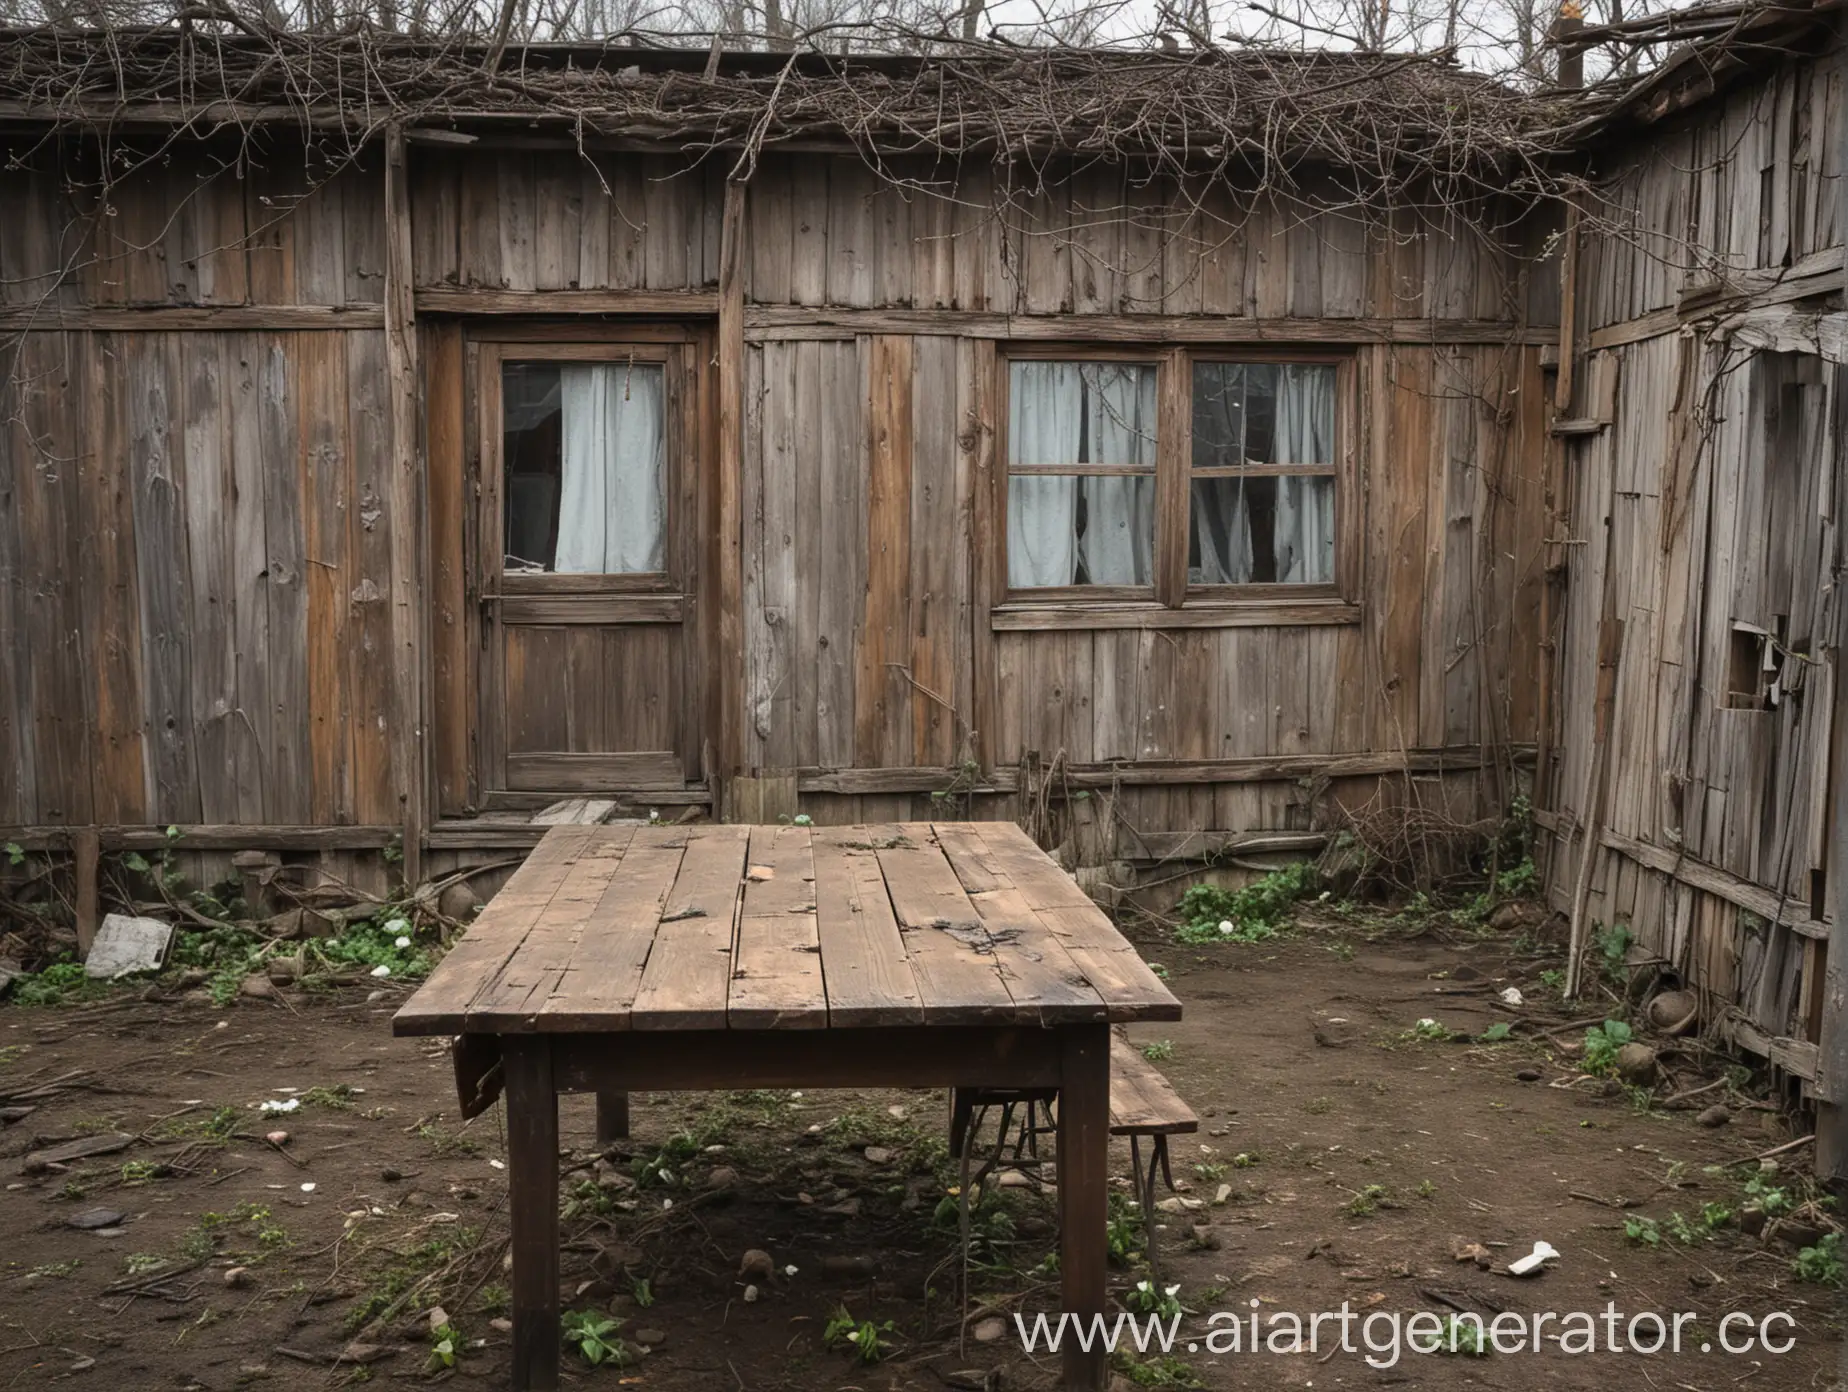 Abandoned-Wooden-Building-in-Spring-Weather-with-Table-Outside